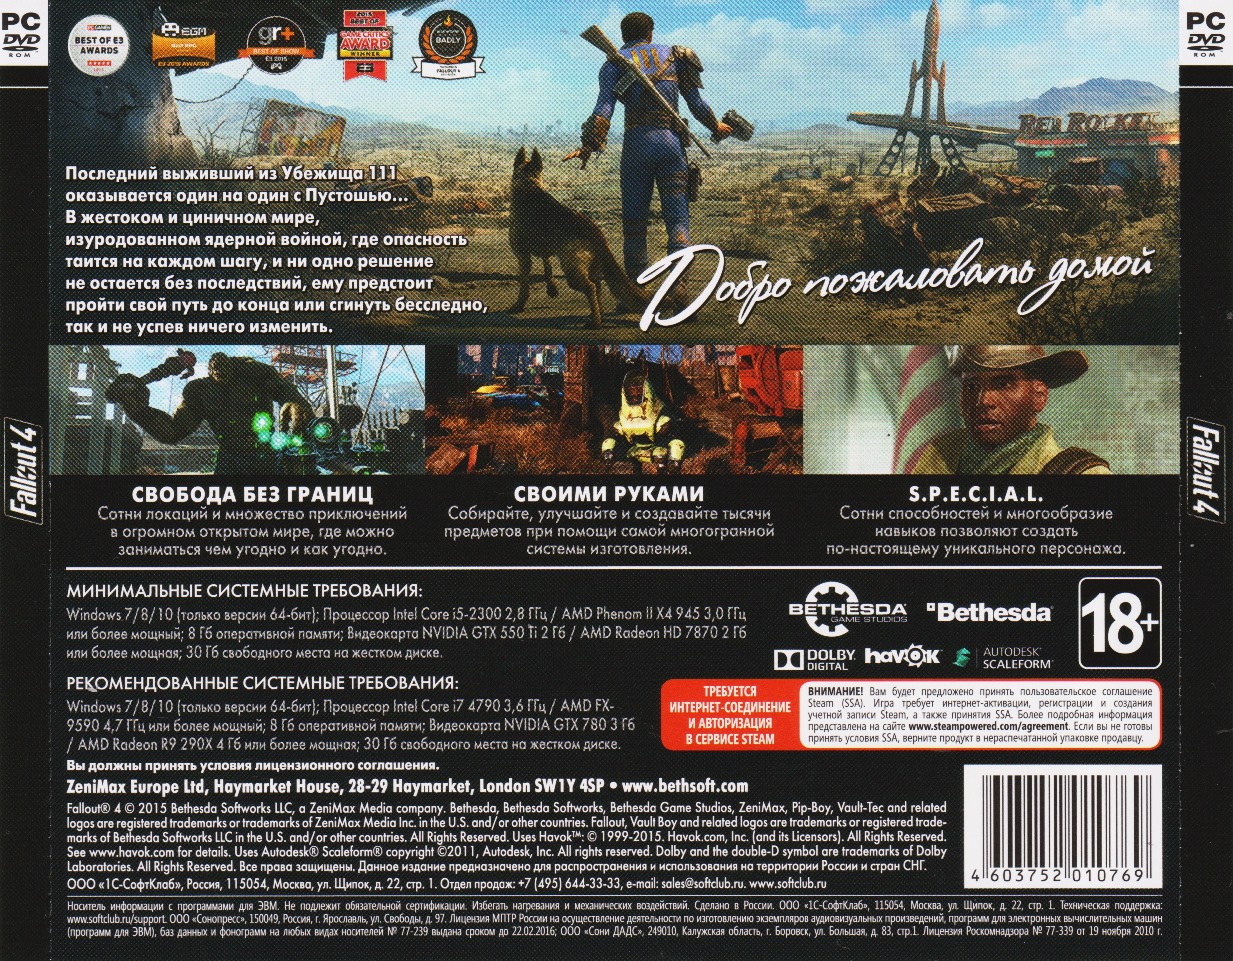 Fallout 4 steam product code - natdas